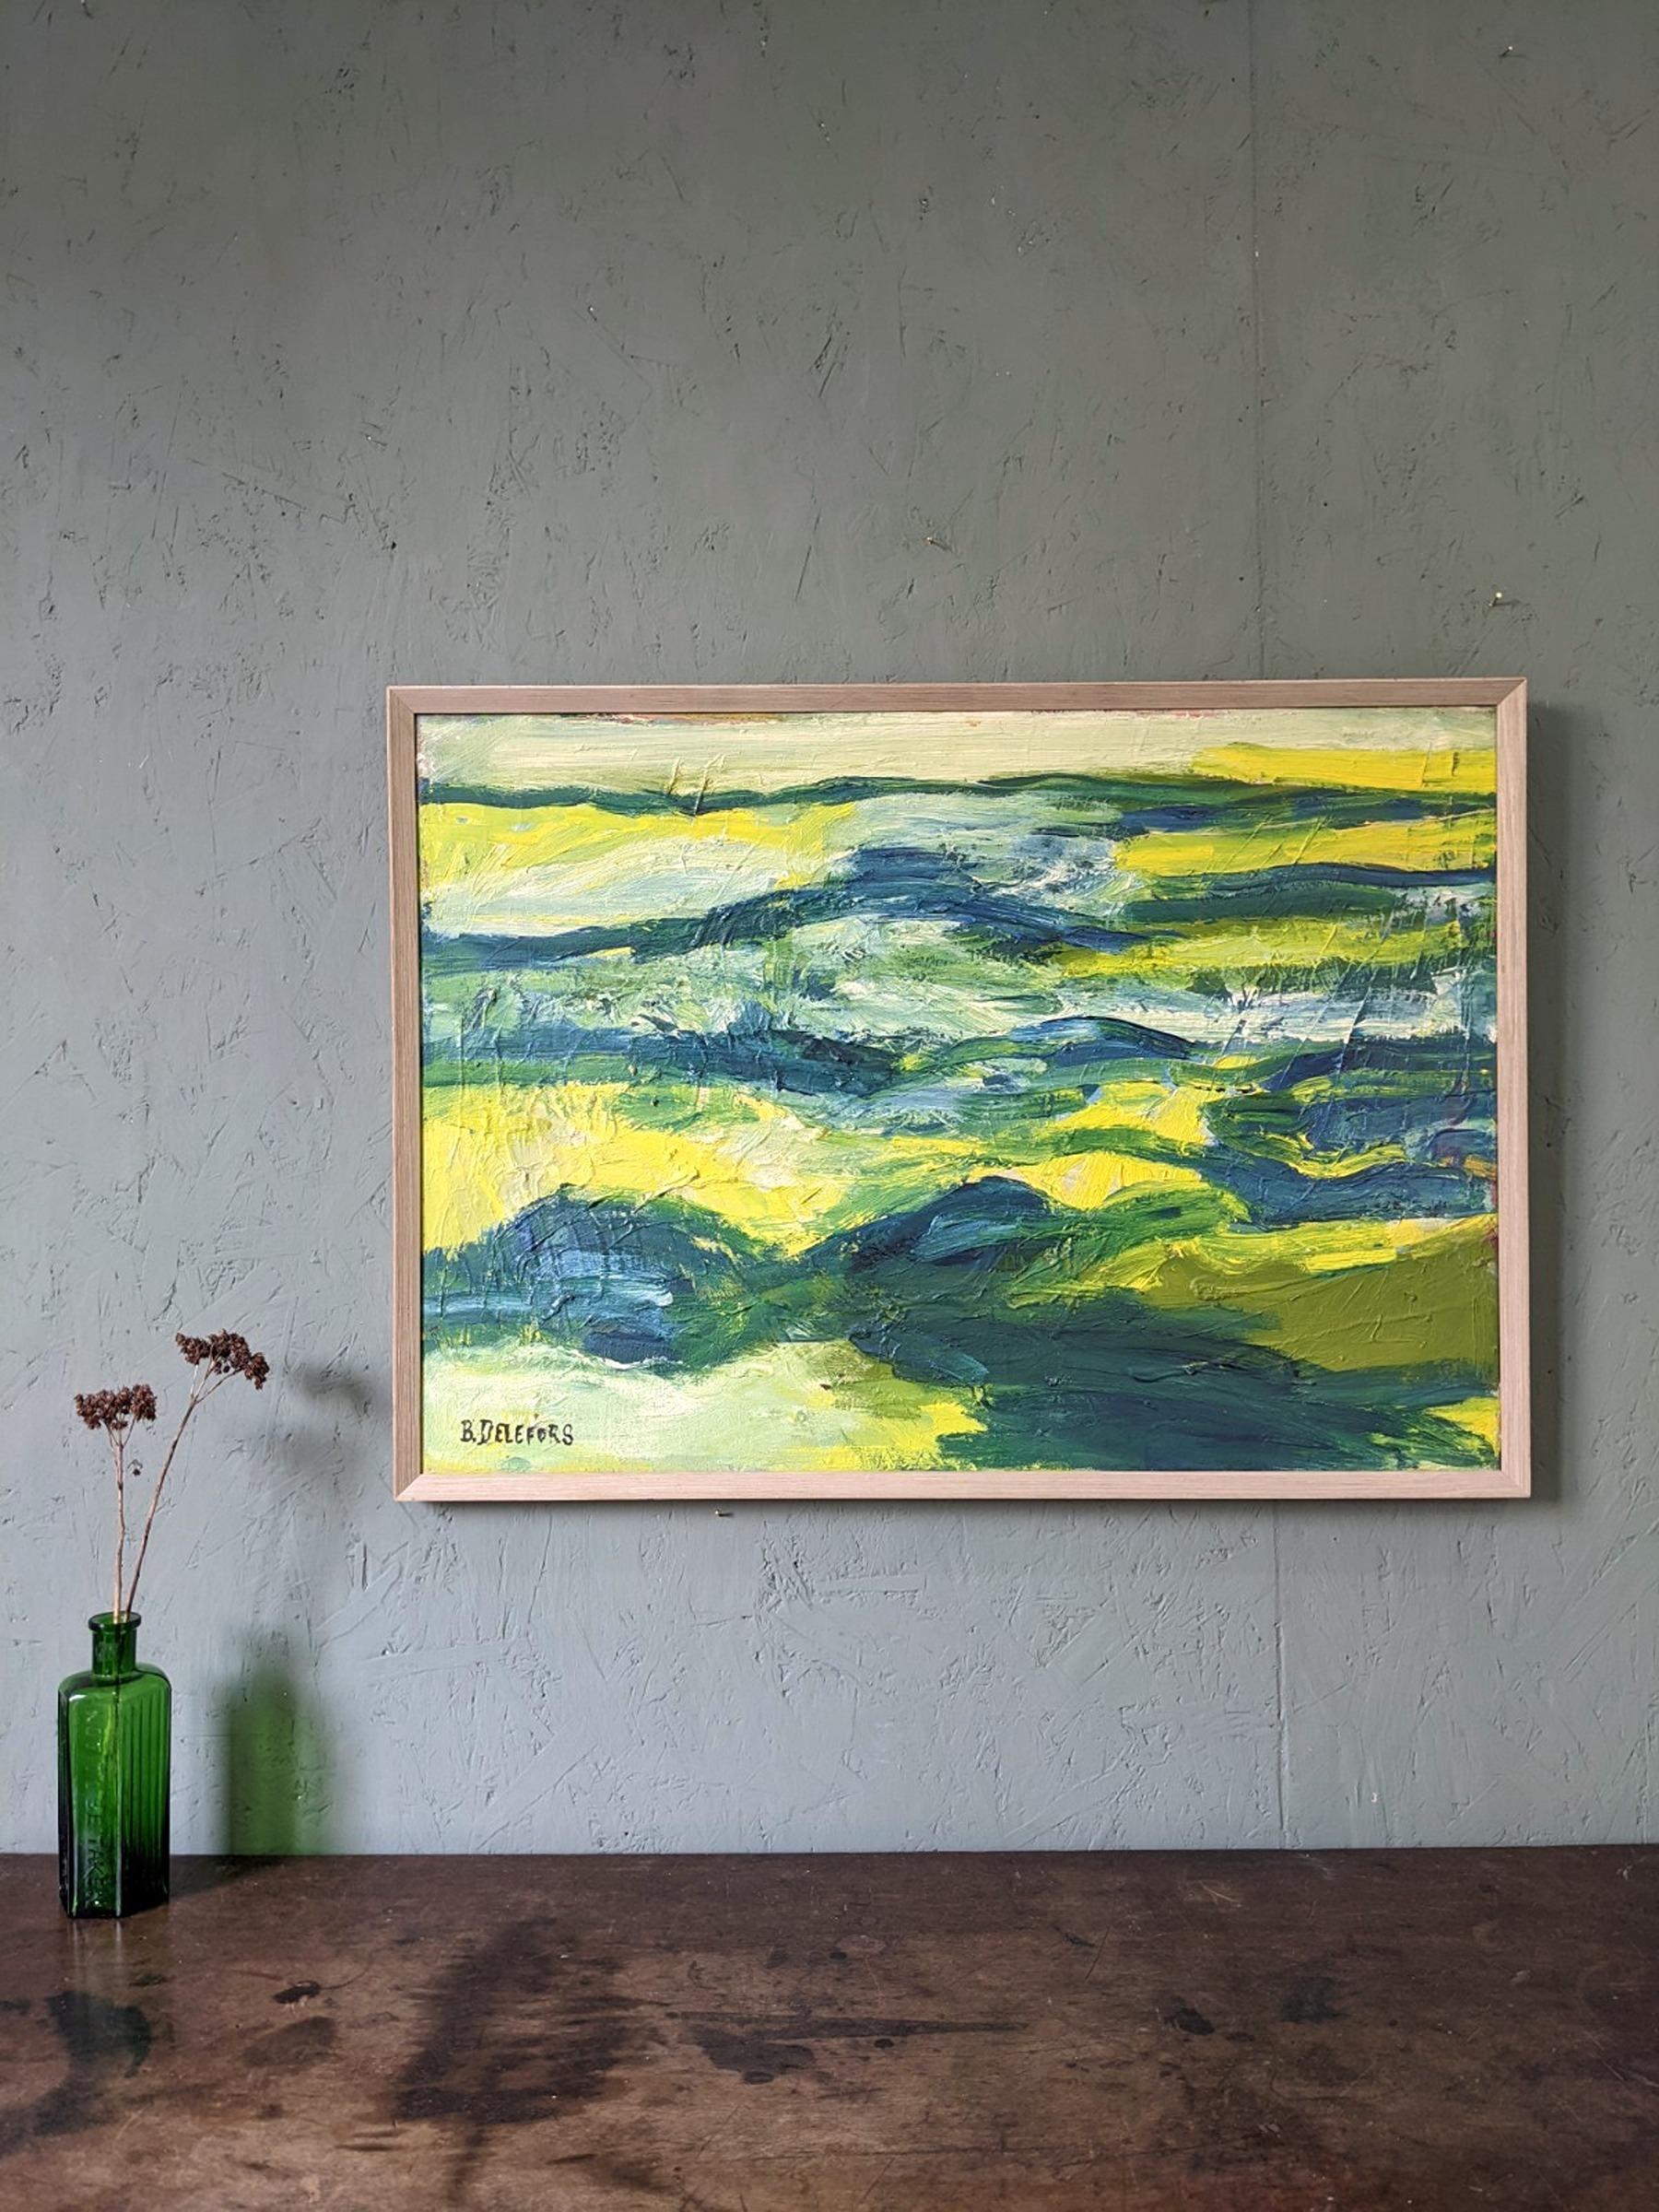 WAVES
Size: 48.5 x 67.5 cm (including frame)
Oil on canvas

A rhythmic and richly textured mid-century abstract composition, executed in oil onto canvas.

Embracing the principles of movement and rhythm, this abstract composition showcases a dynamic